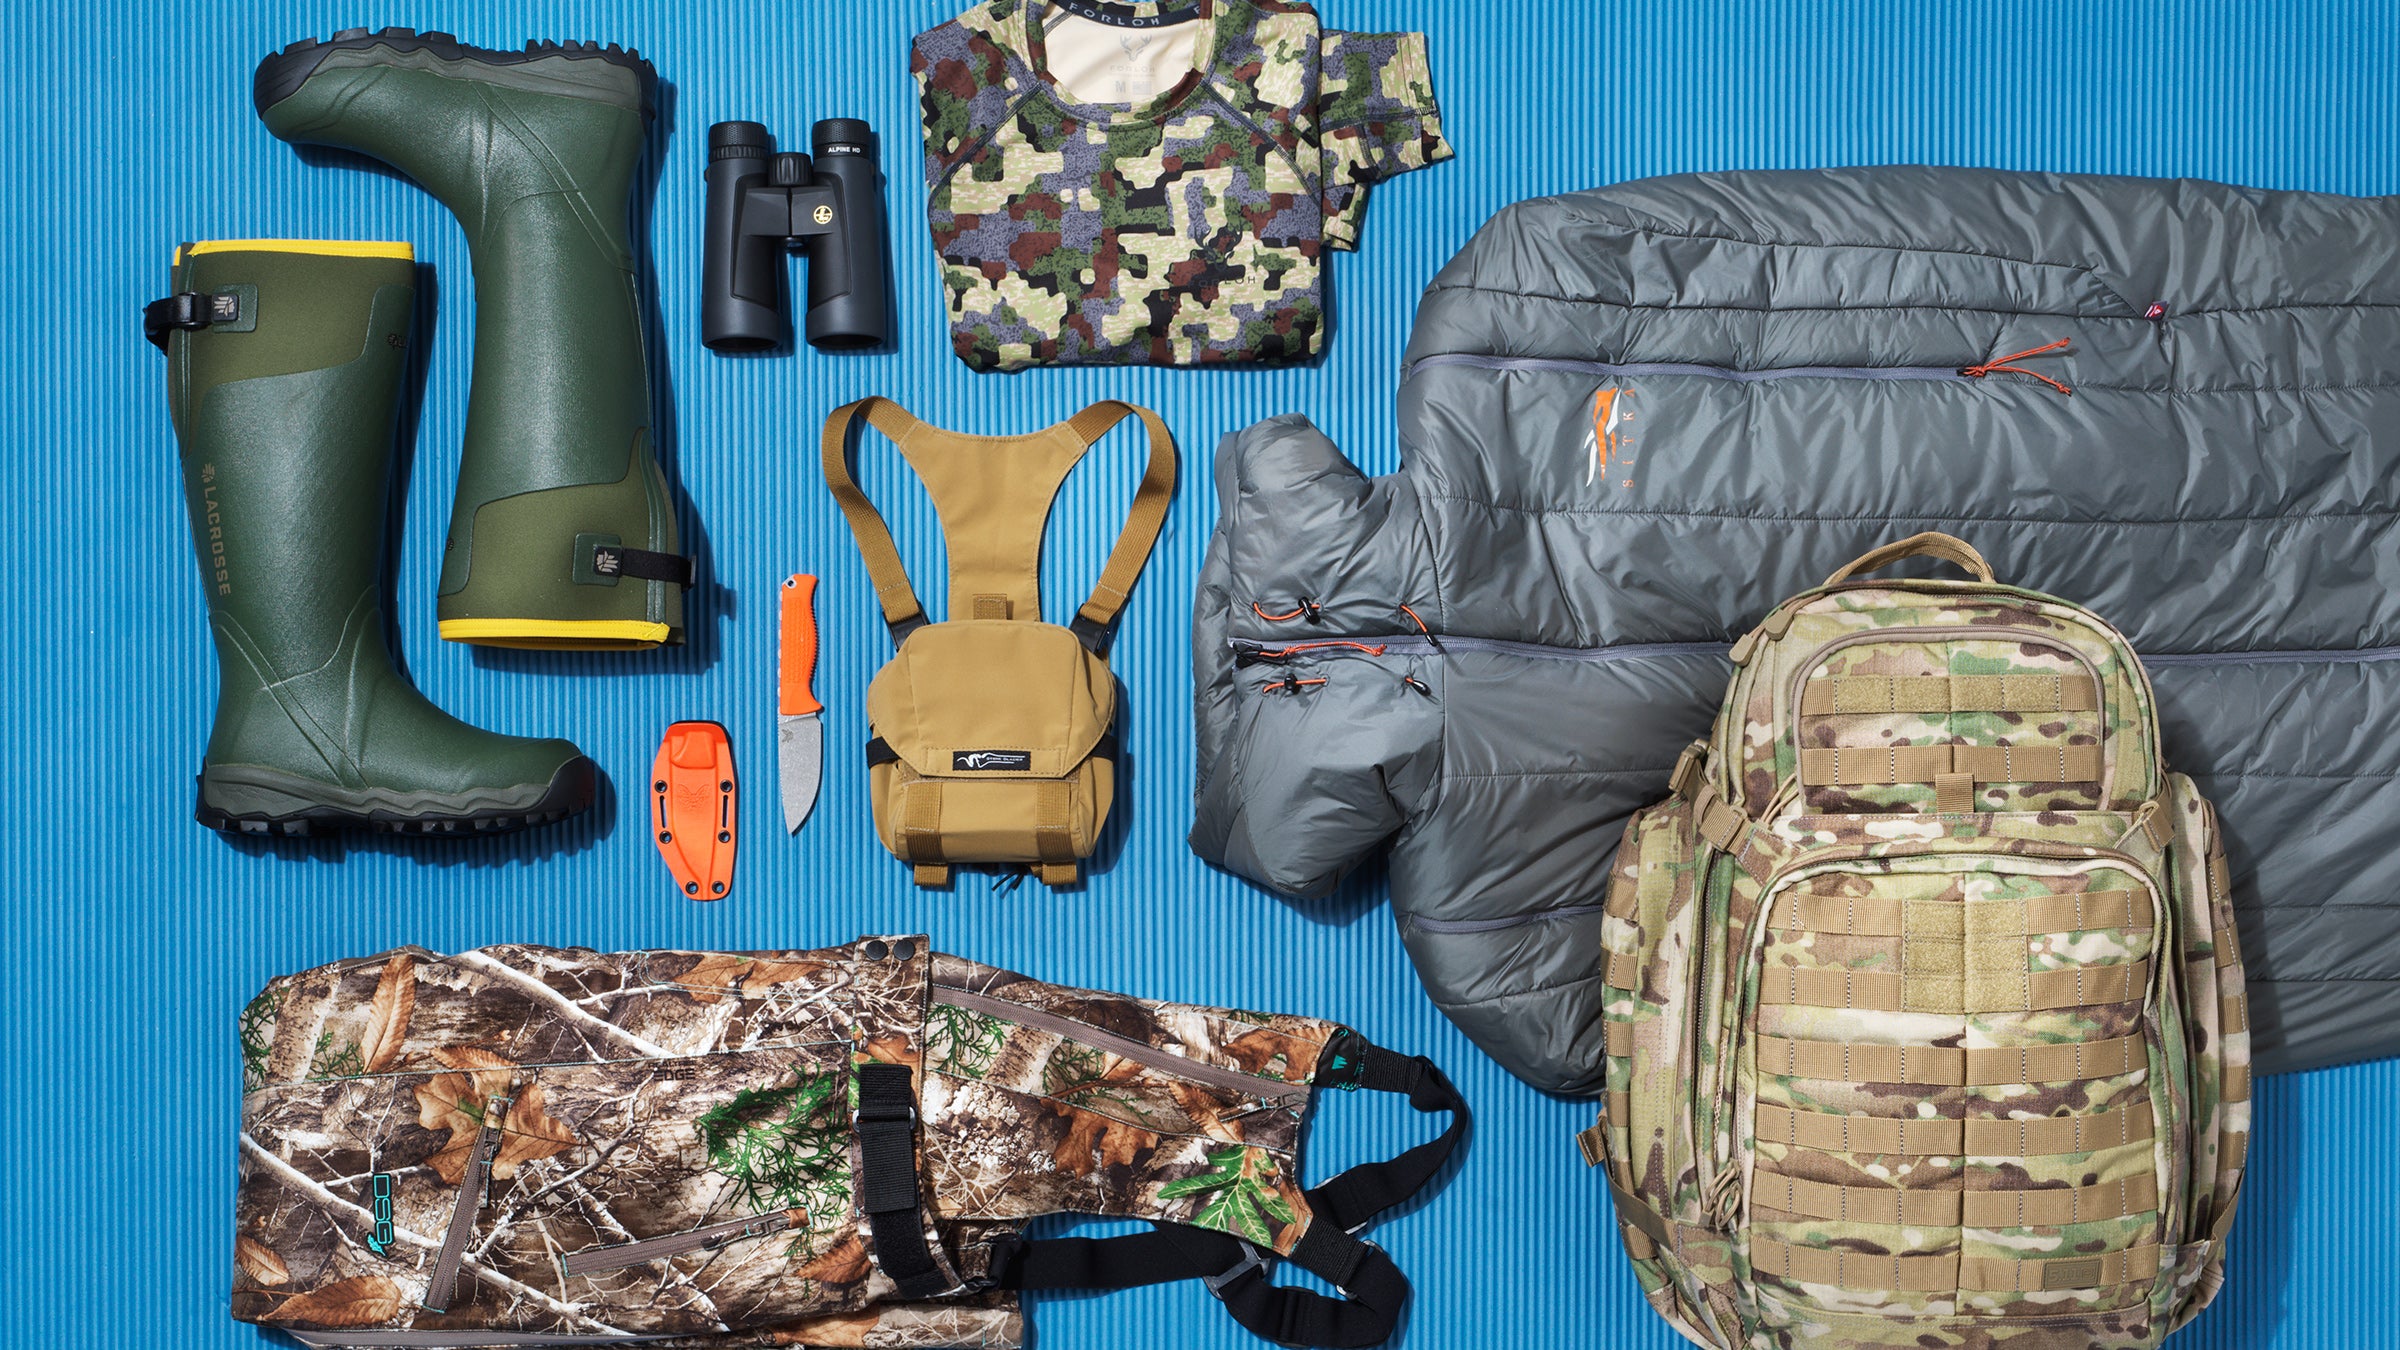 2020's best new hunting gear: 9 nifty accessories for this